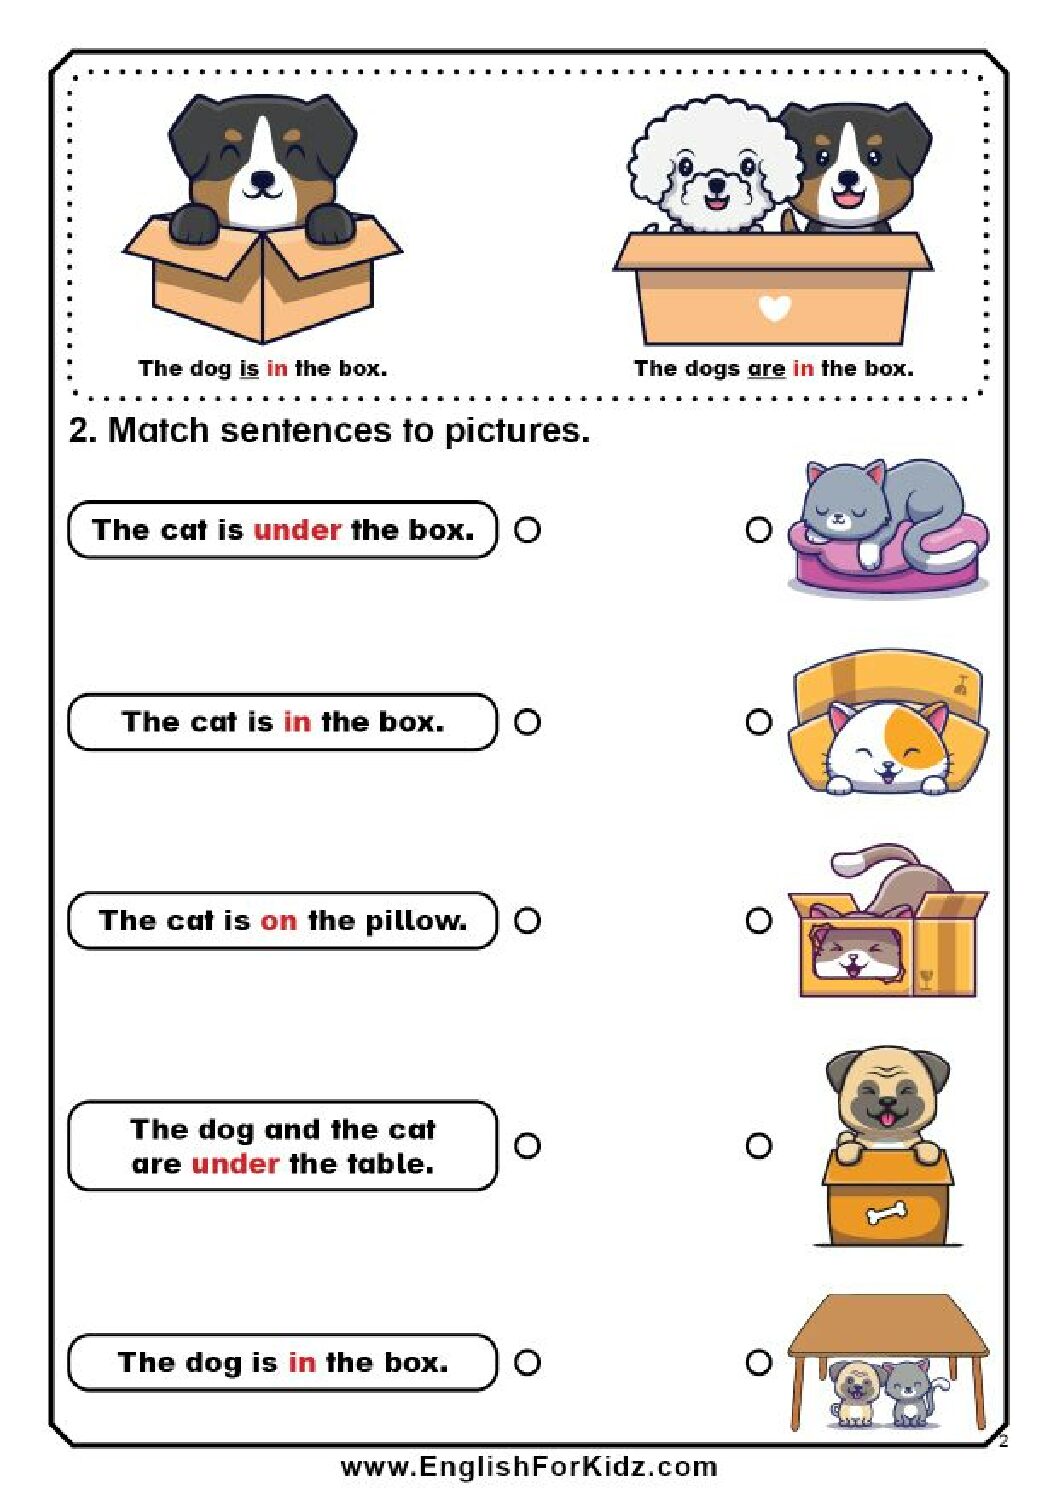 prepositions-of-place-free-printable-worksheets-language-advisor